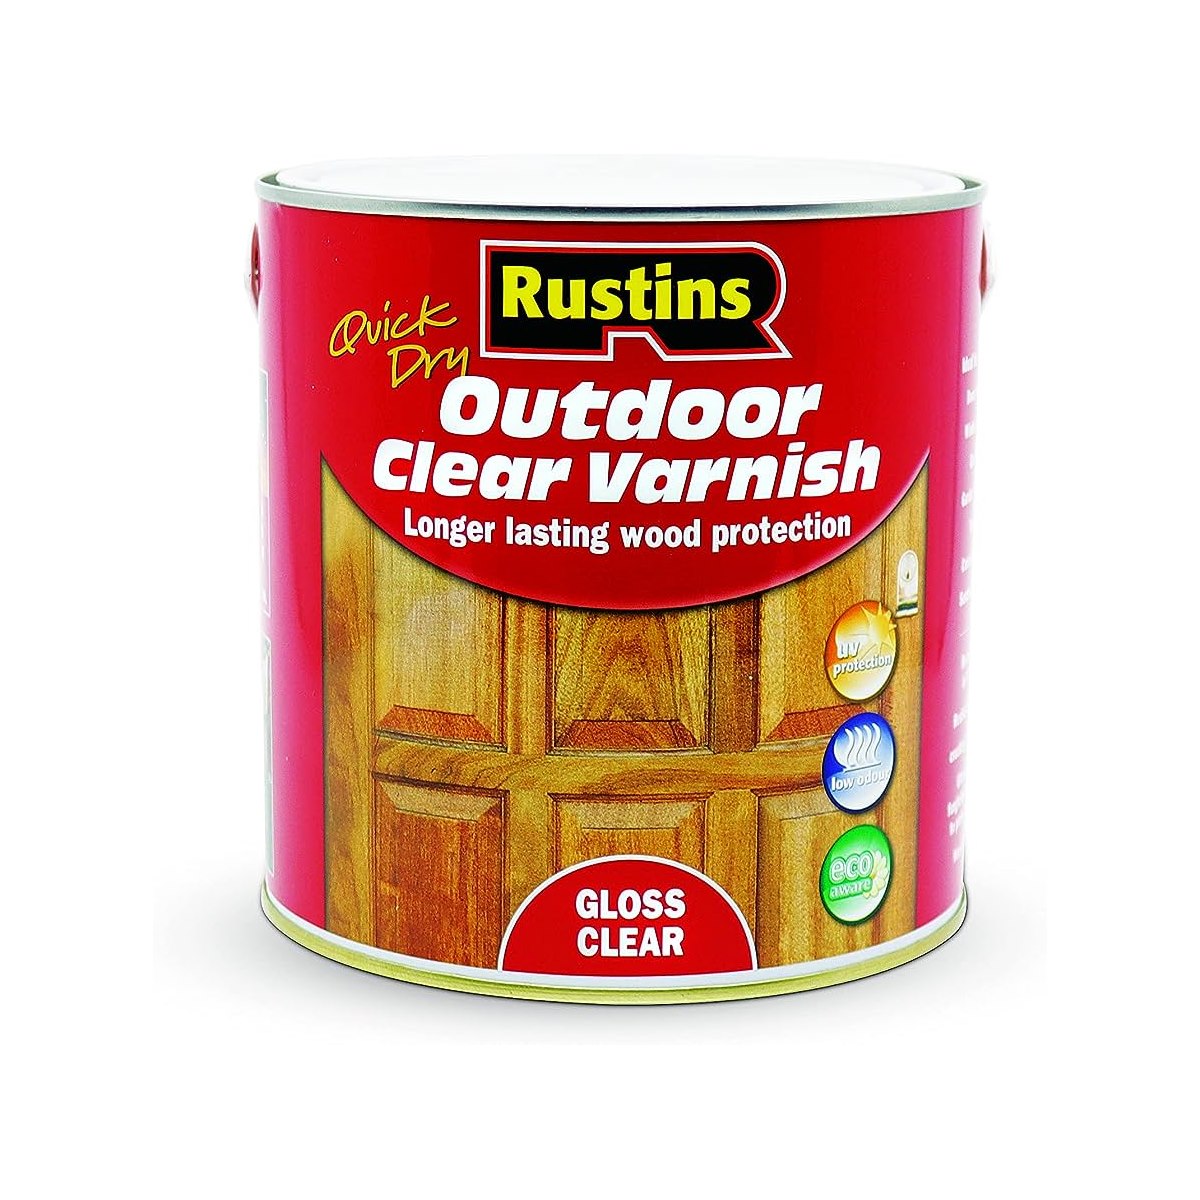 Rustins Quick Dry Outdoor Clear Varnish Gloss 2.5 Litre